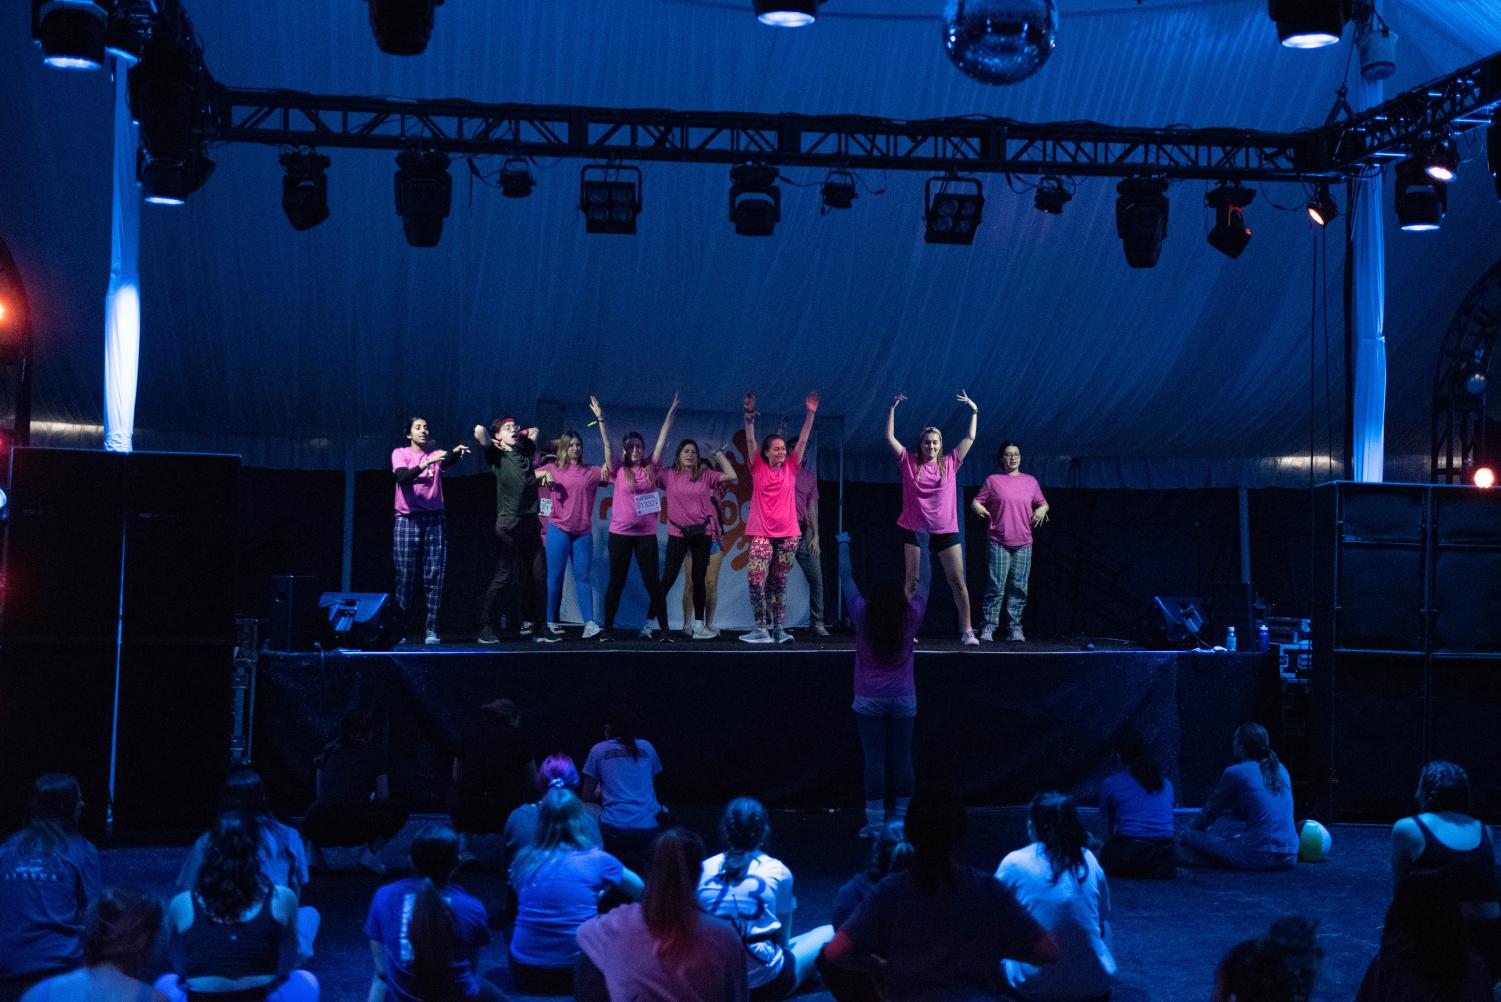 People in pink stand on the stage with their arms in the air.